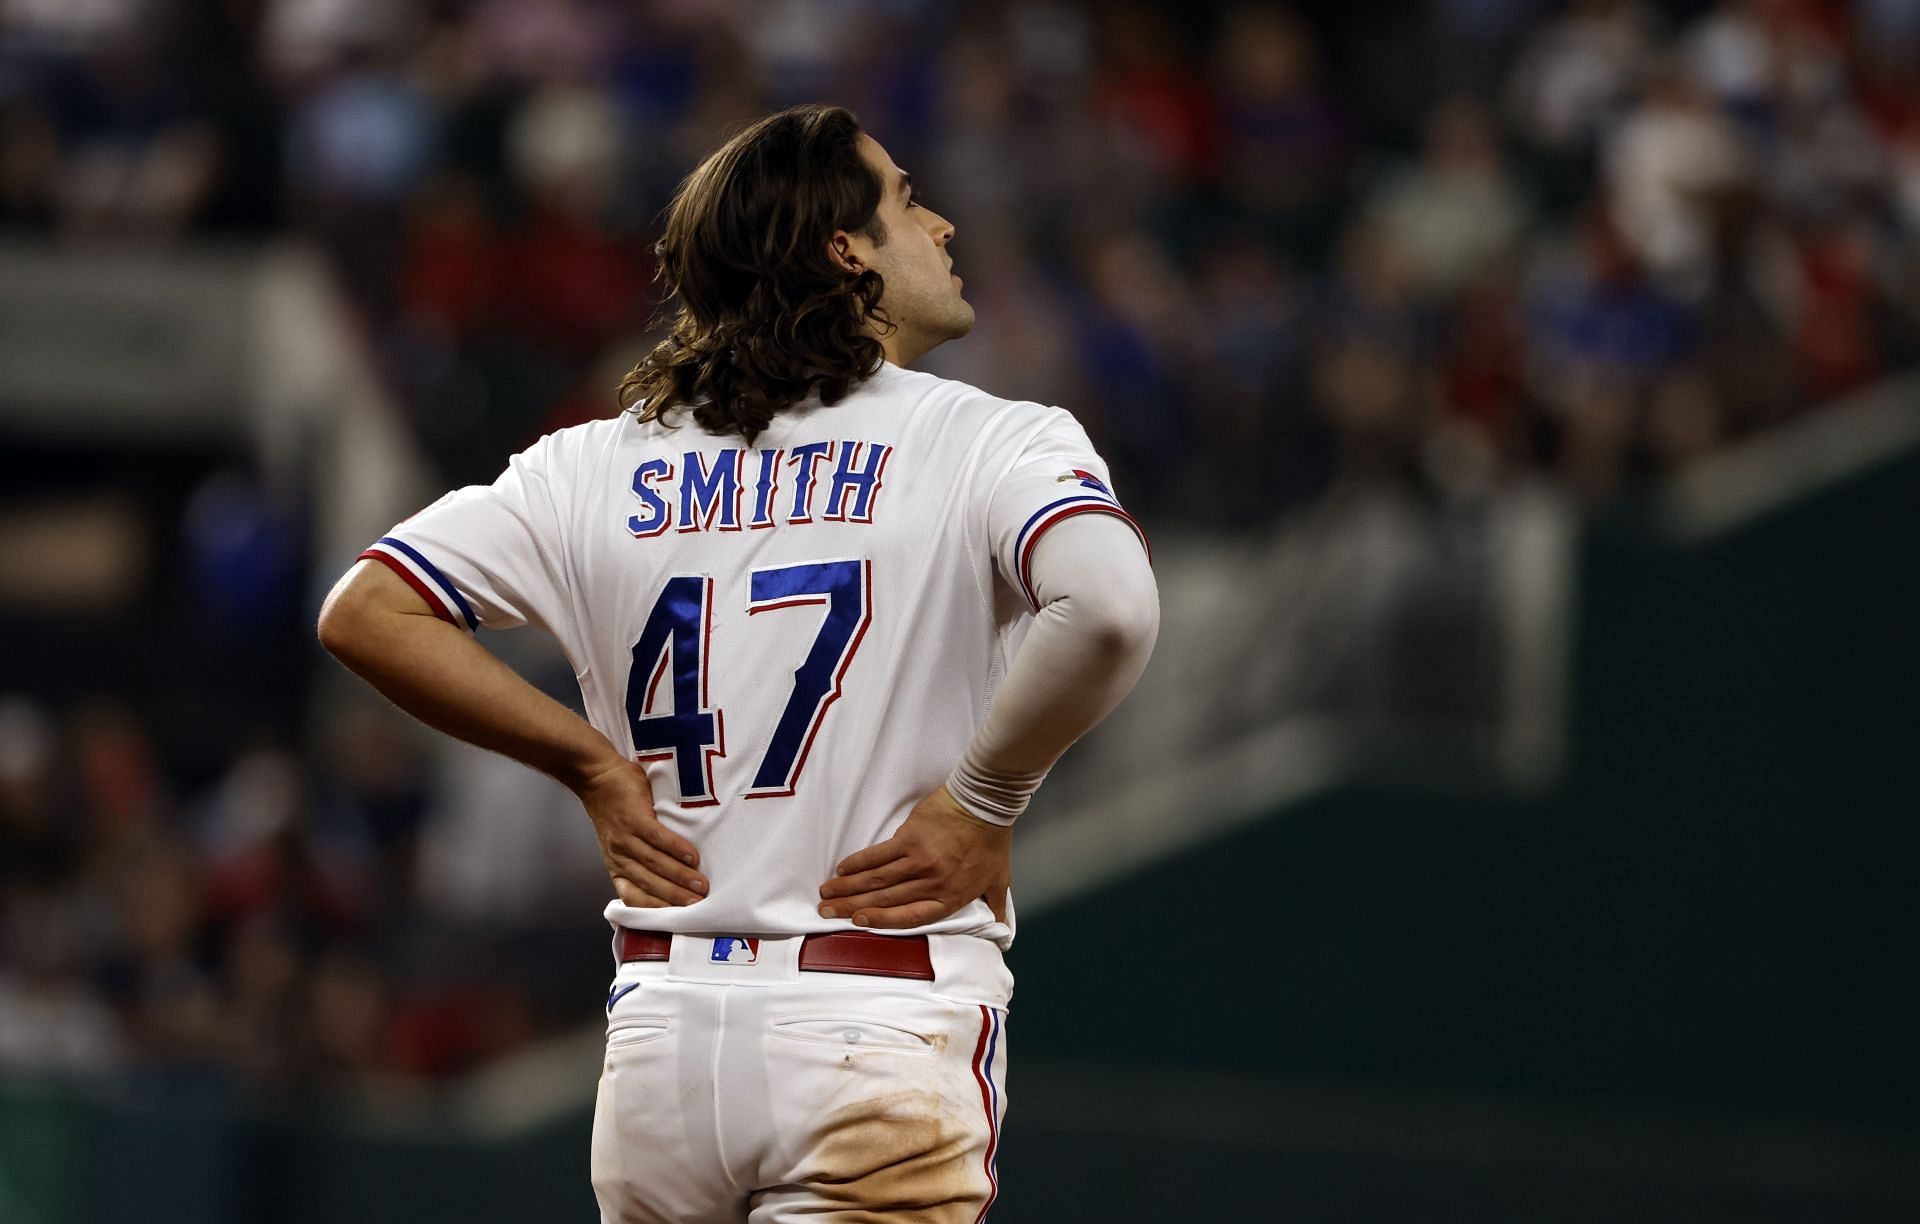 Josh Smith Making the Most of the Everyday Role with the Rangers